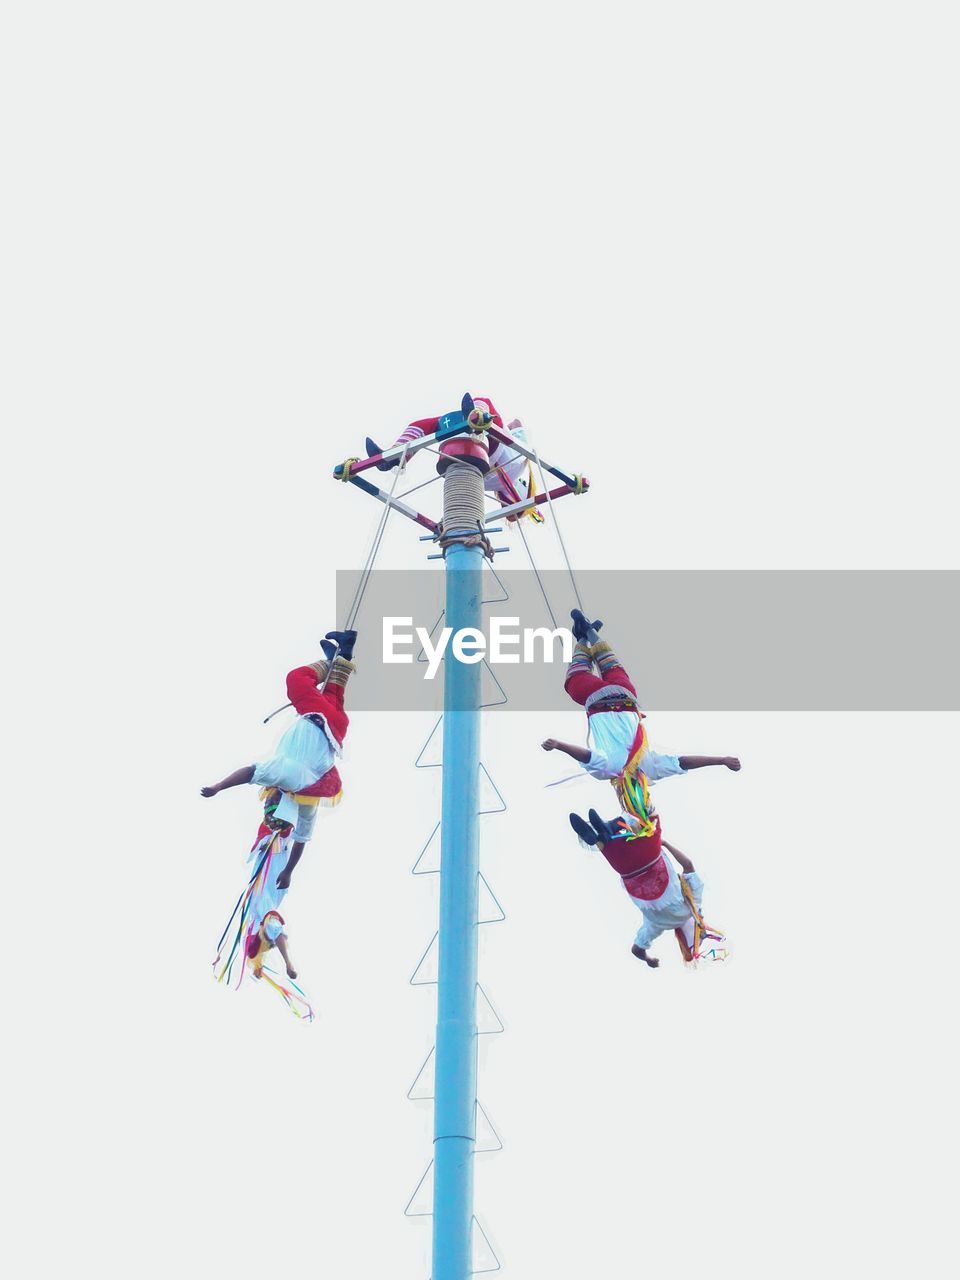 Low angle view of performers hanging on pole against clear sky